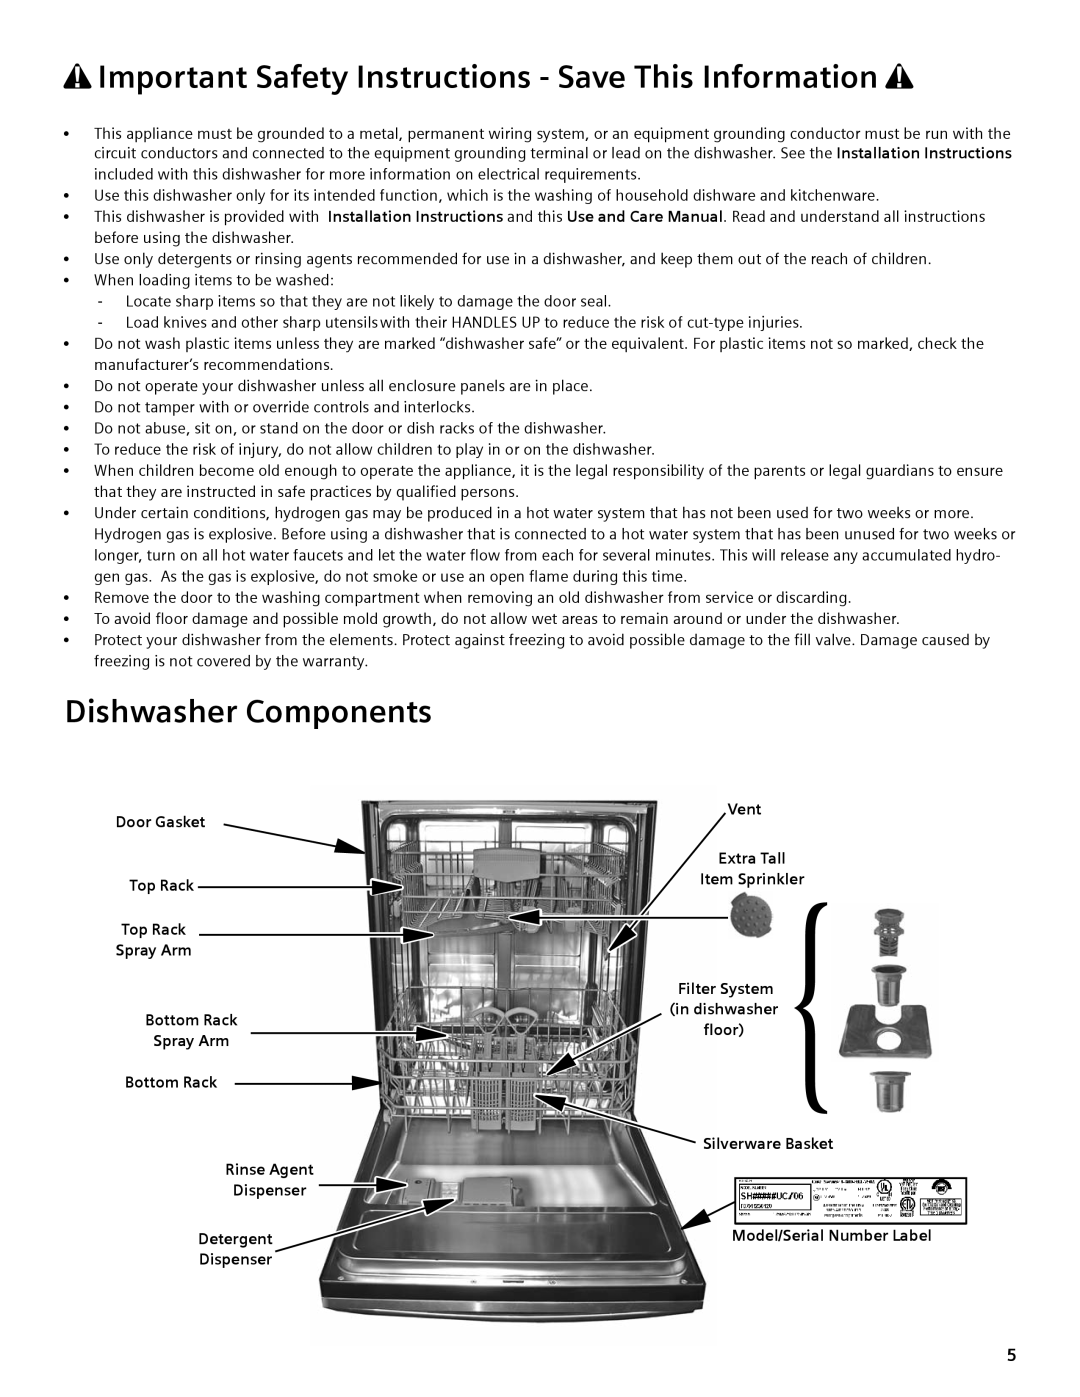 Thermador DWHD94EP, DWHD94BS, DWHD94BP Dishwasher Components, Important Safety Instructions - Save This Information, Vent 